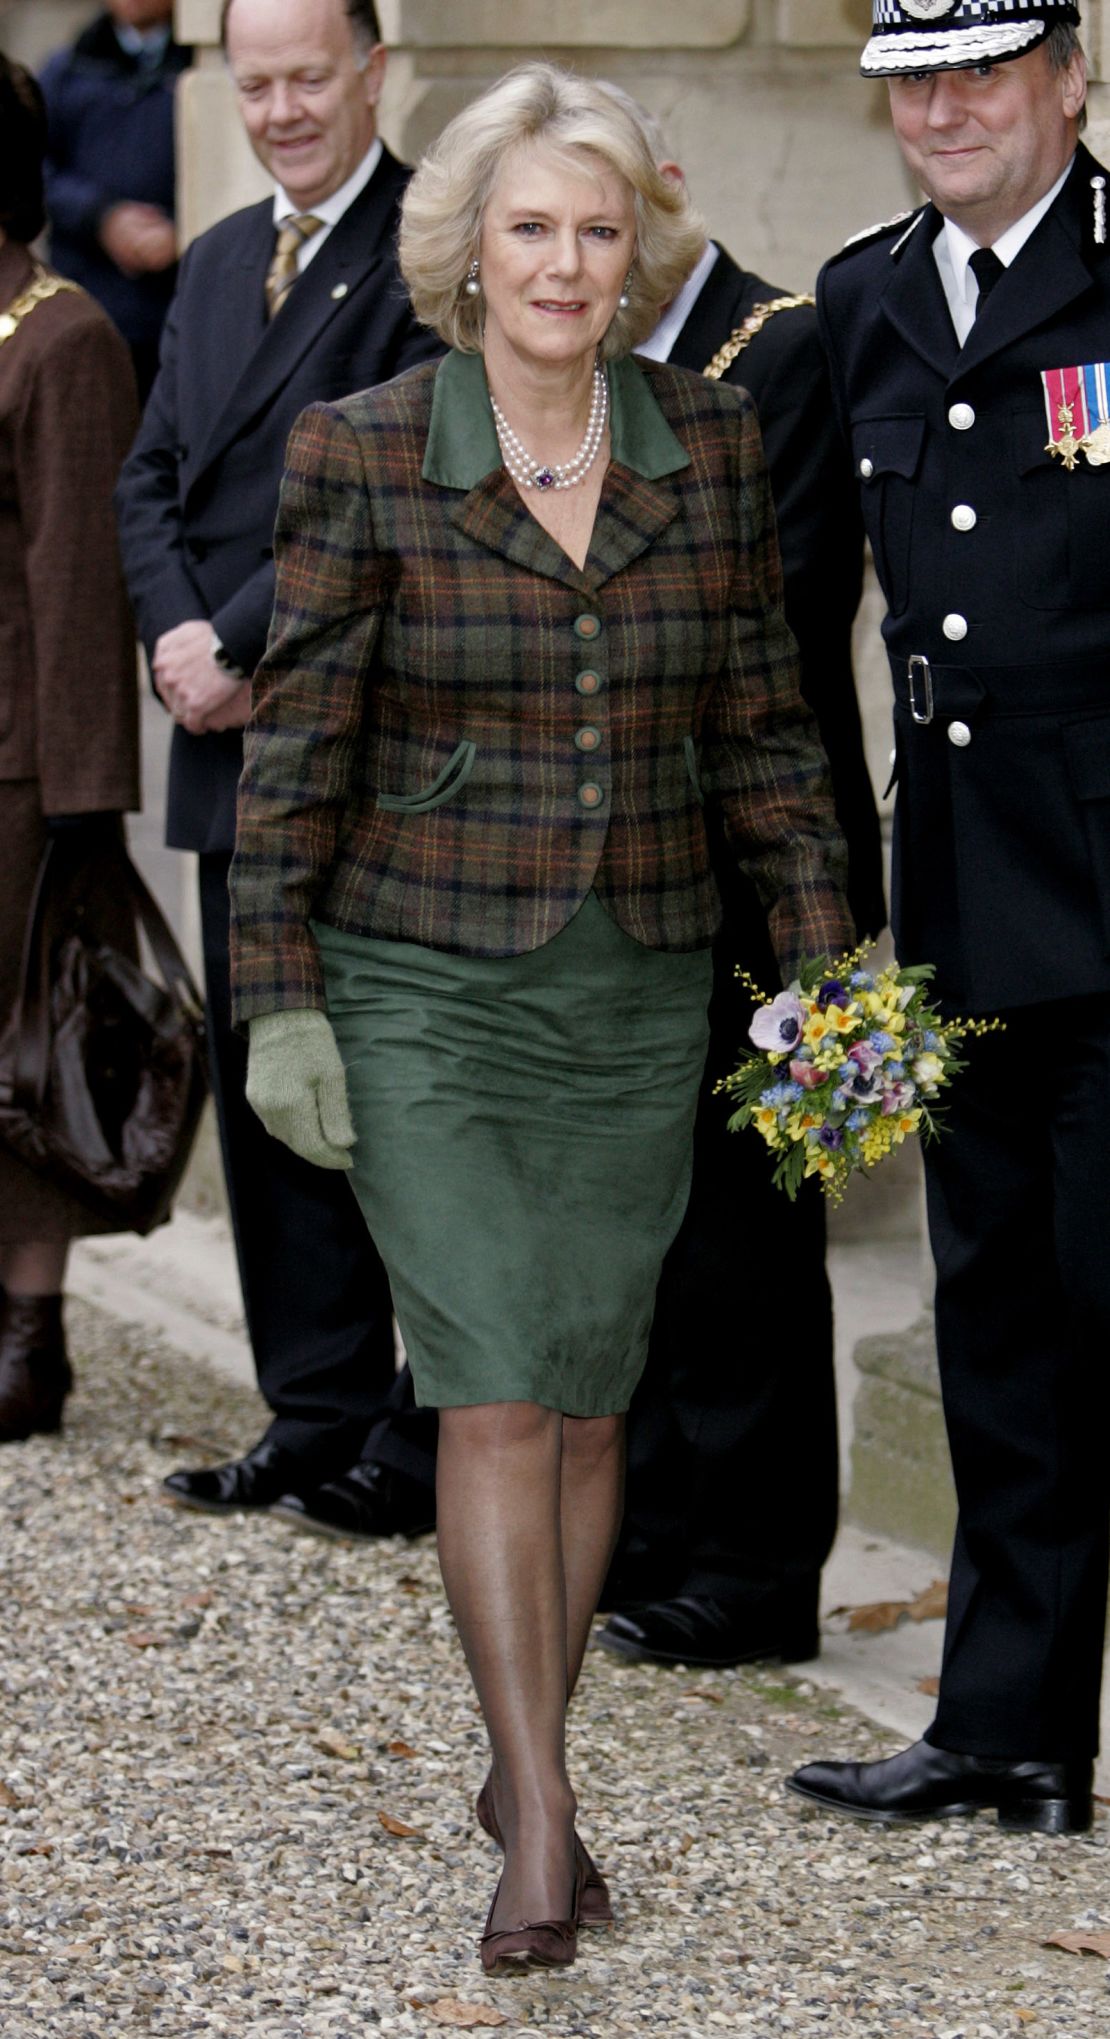 In this look from 2006, Camilla is bridging her two style identities with a country casual tartan fitted jacket (paired with a matching forest green dress) and accessorized with one her favorite styles of necklace.